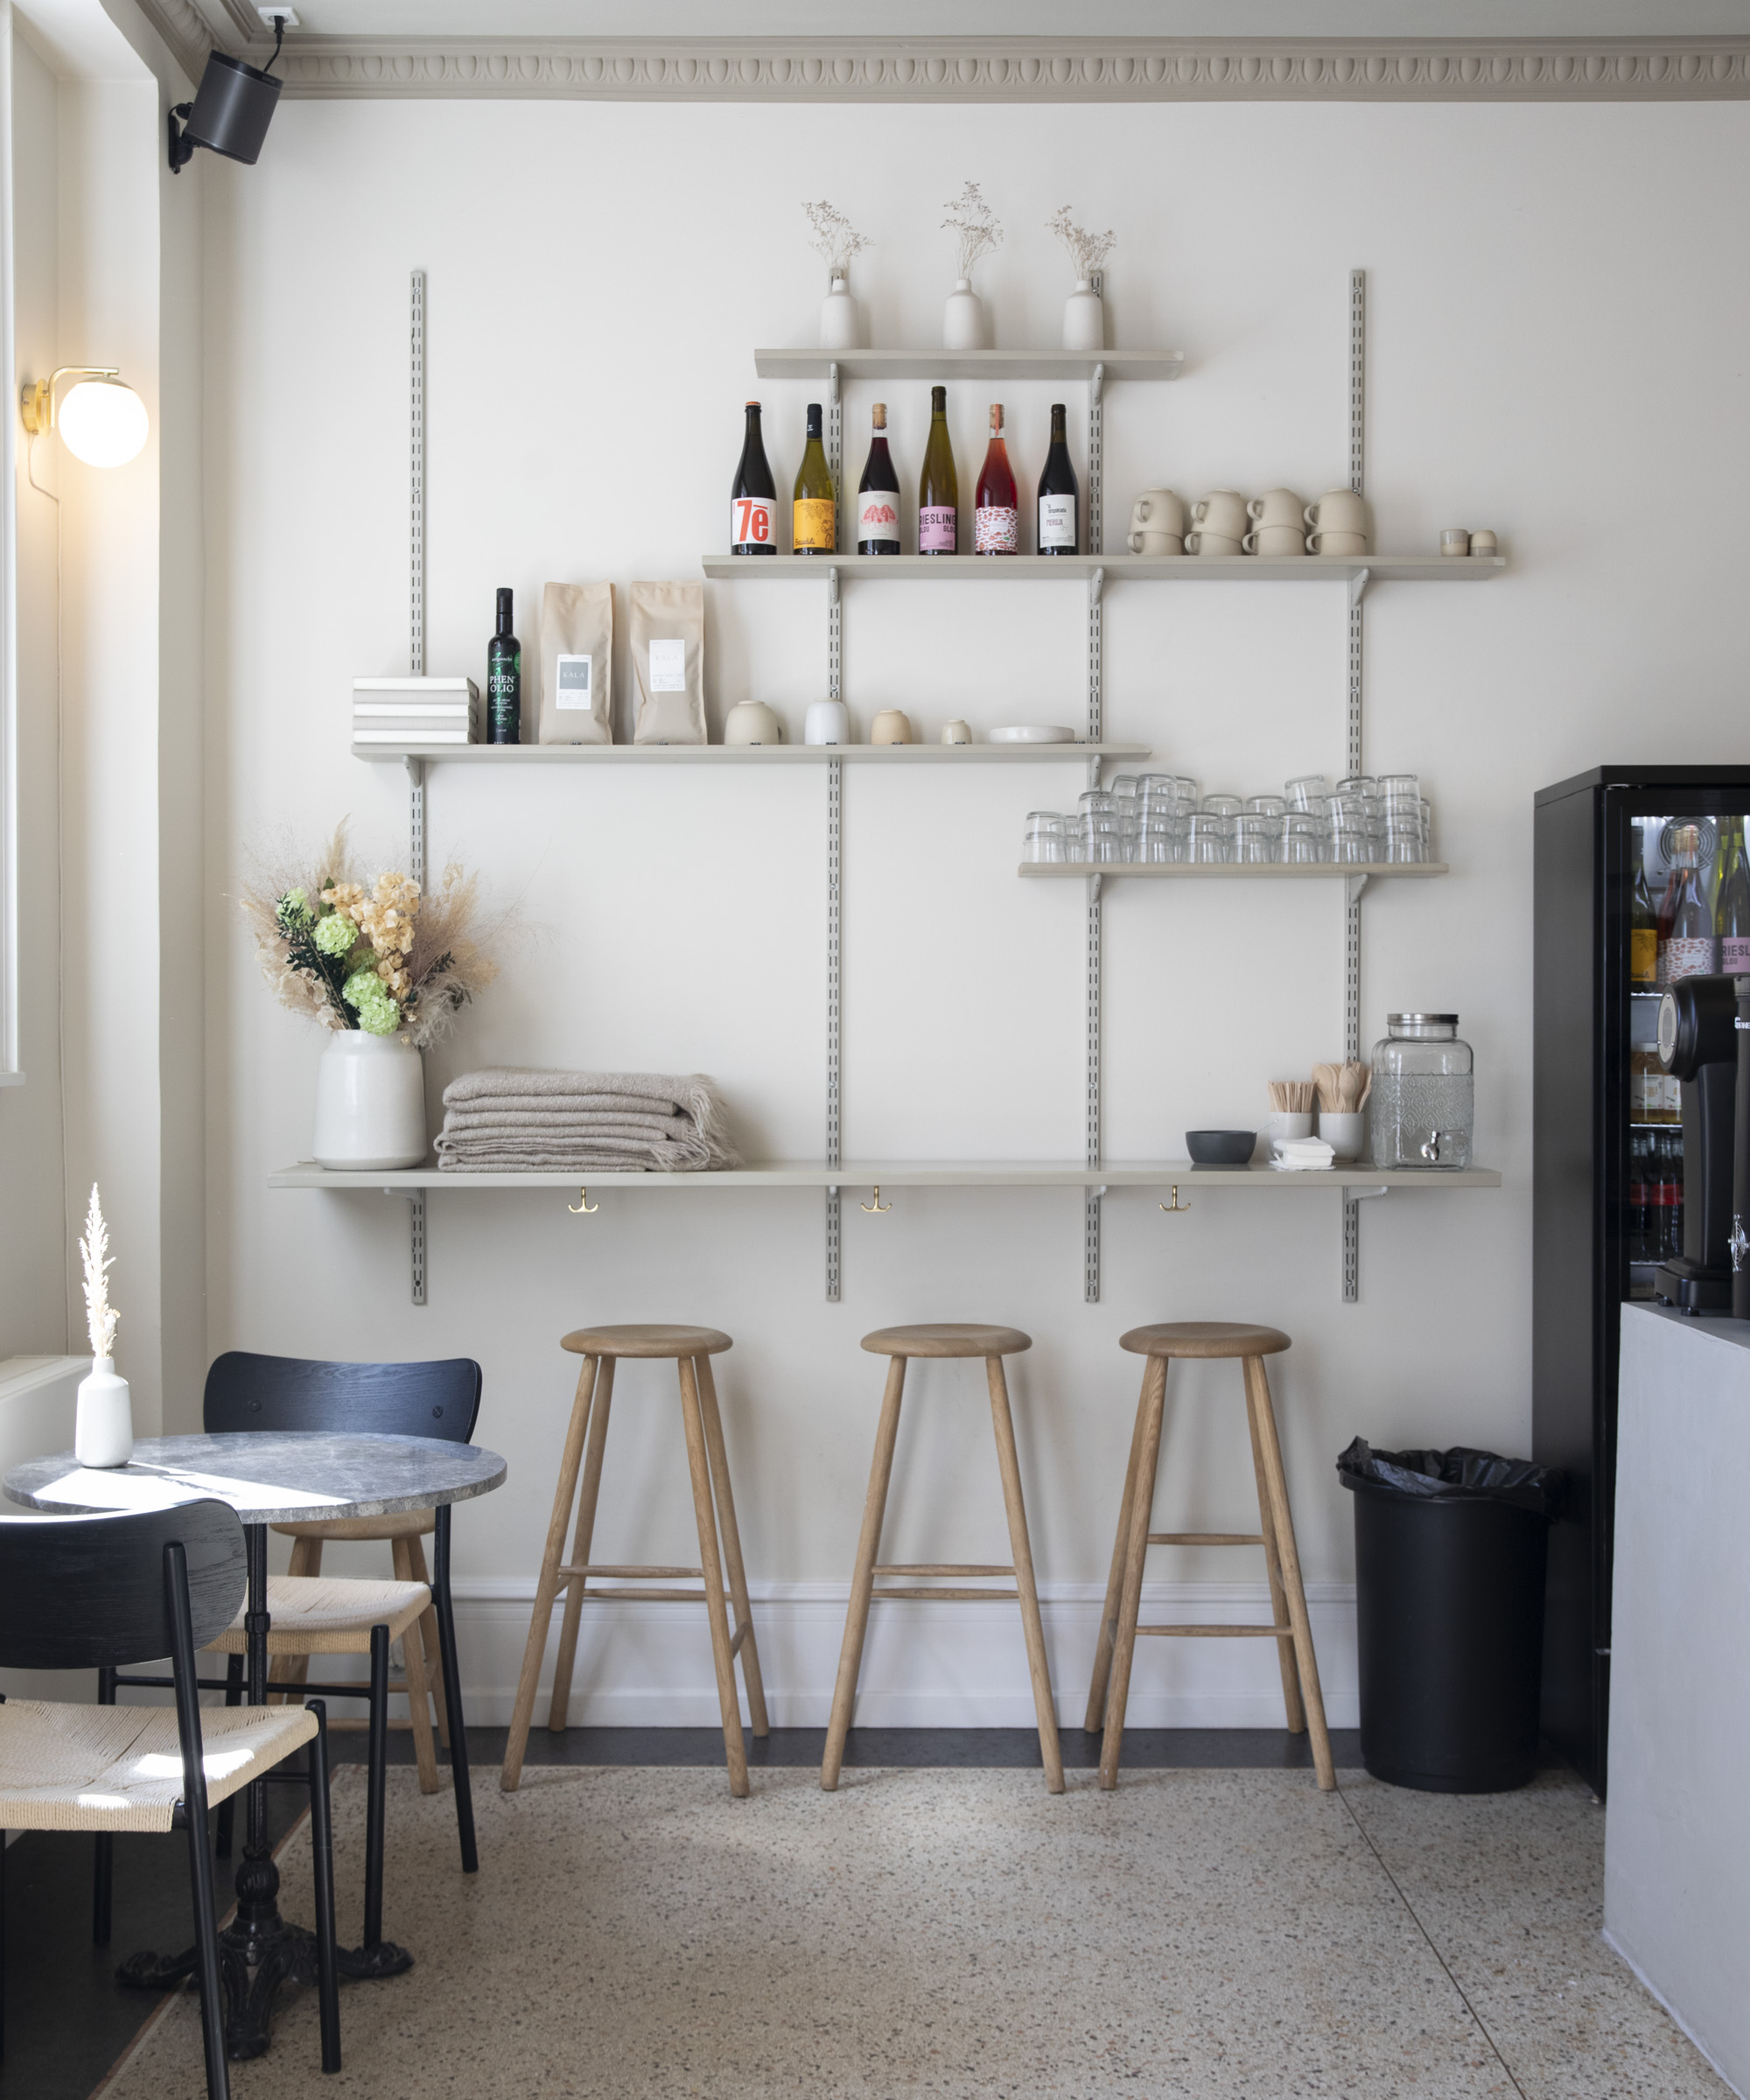 Pick whatever you like at KALA in Nørrebro – A rare gem near the lakes where the food and drinks truly taste as good as they look